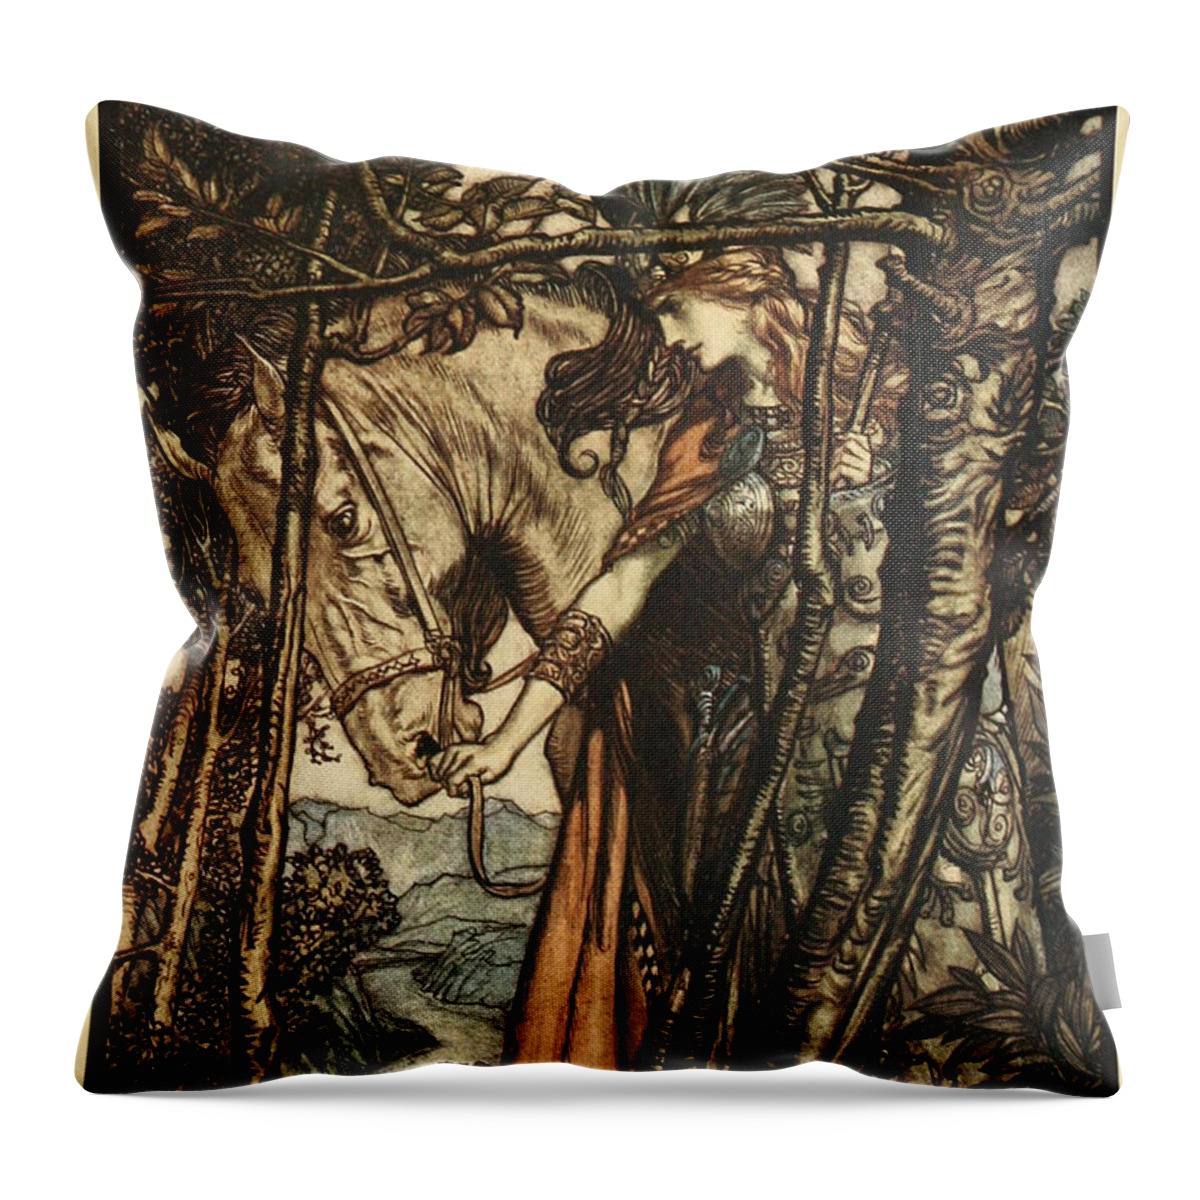 Arthur Rackham - Wagner's Ring Cycle The Valkyrie (1910) 5 Throw Pillow featuring the painting RING CYCLE The Valkyrie by Arthur Rackham